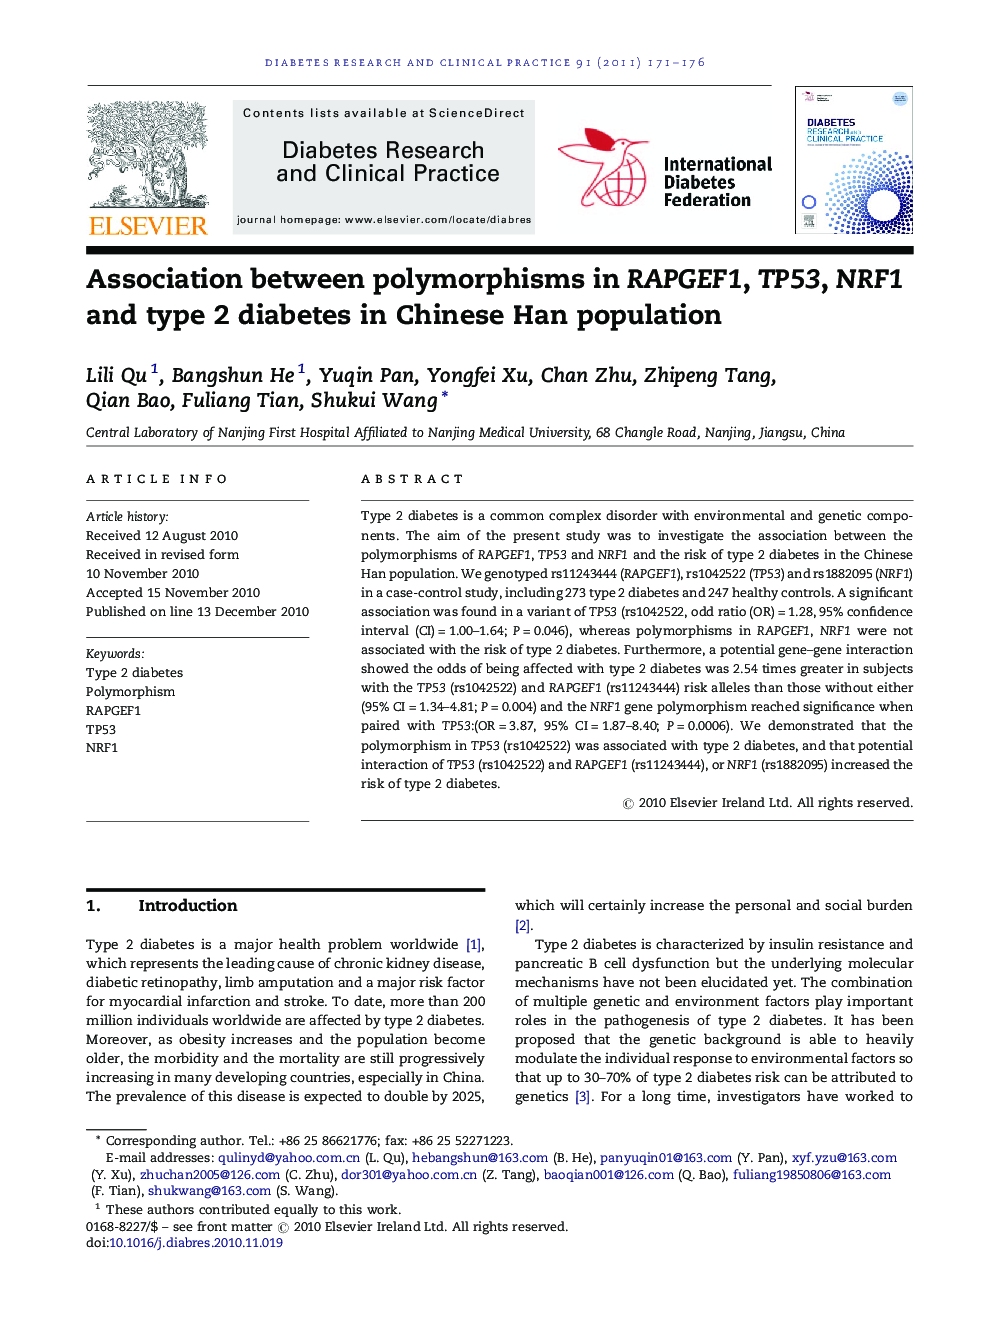 Association between polymorphisms in RAPGEF1, TP53, NRF1 and type 2 diabetes in Chinese Han population